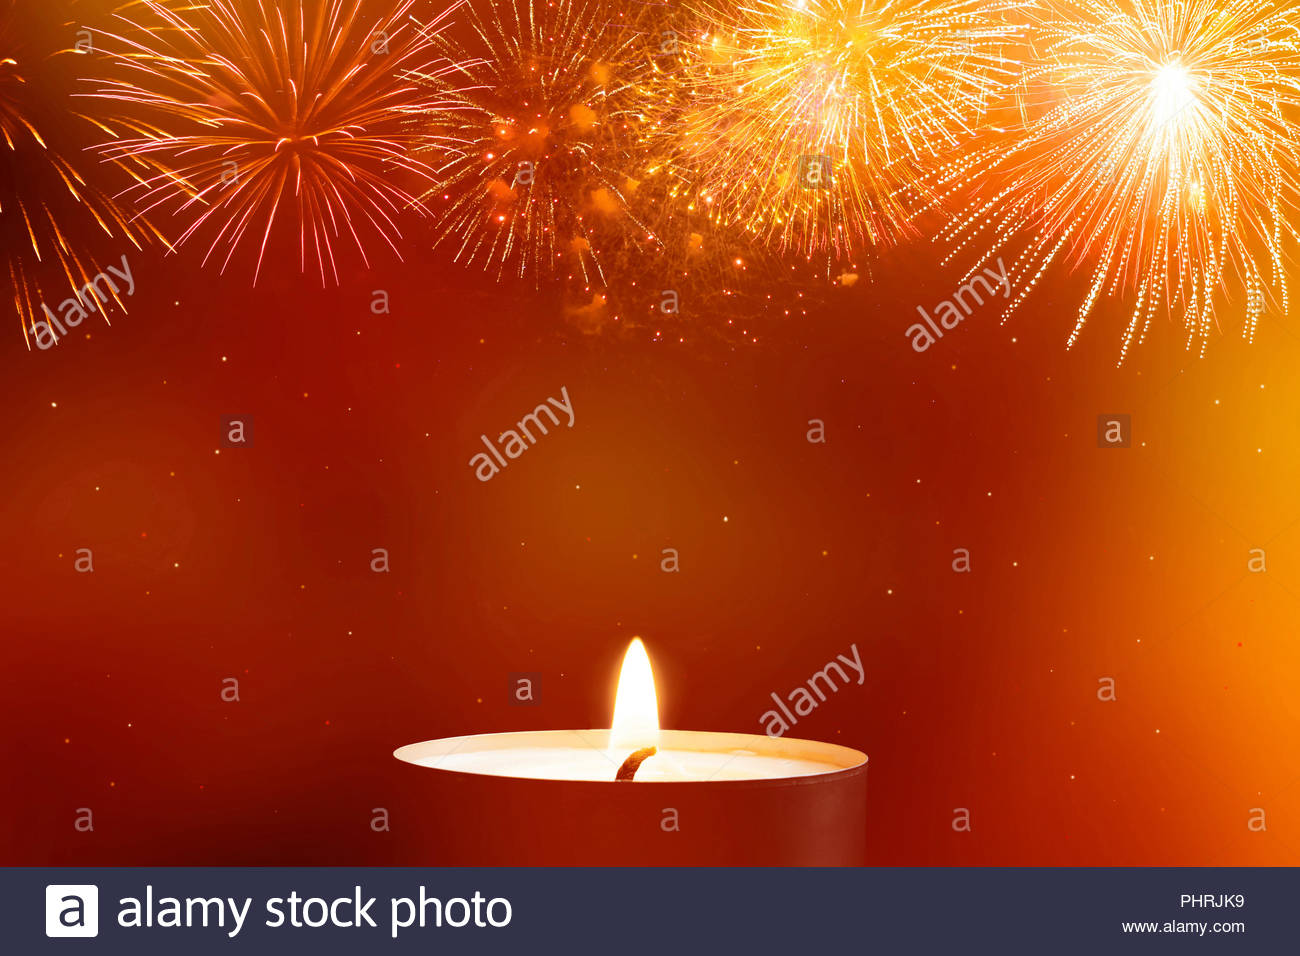 Diwali Background With Candle Light And Firework Stock Photo